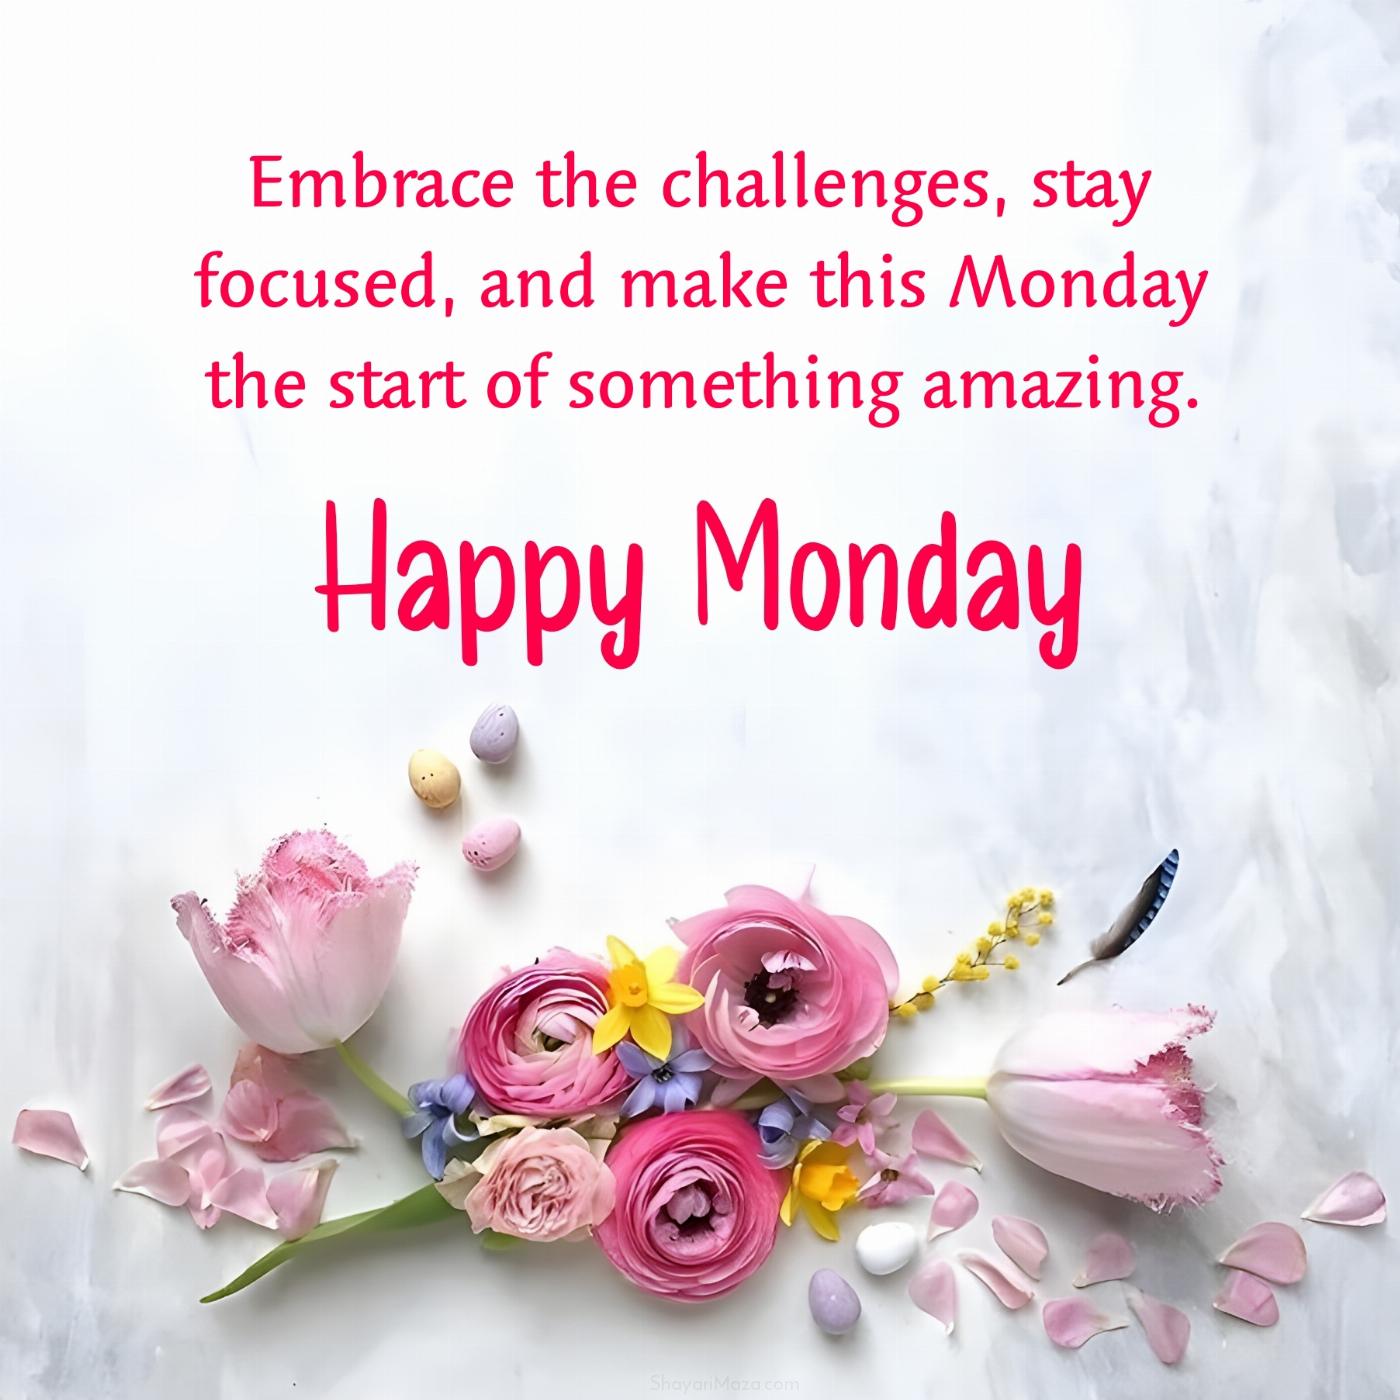 Embrace the challenges stay focused and make this Monday